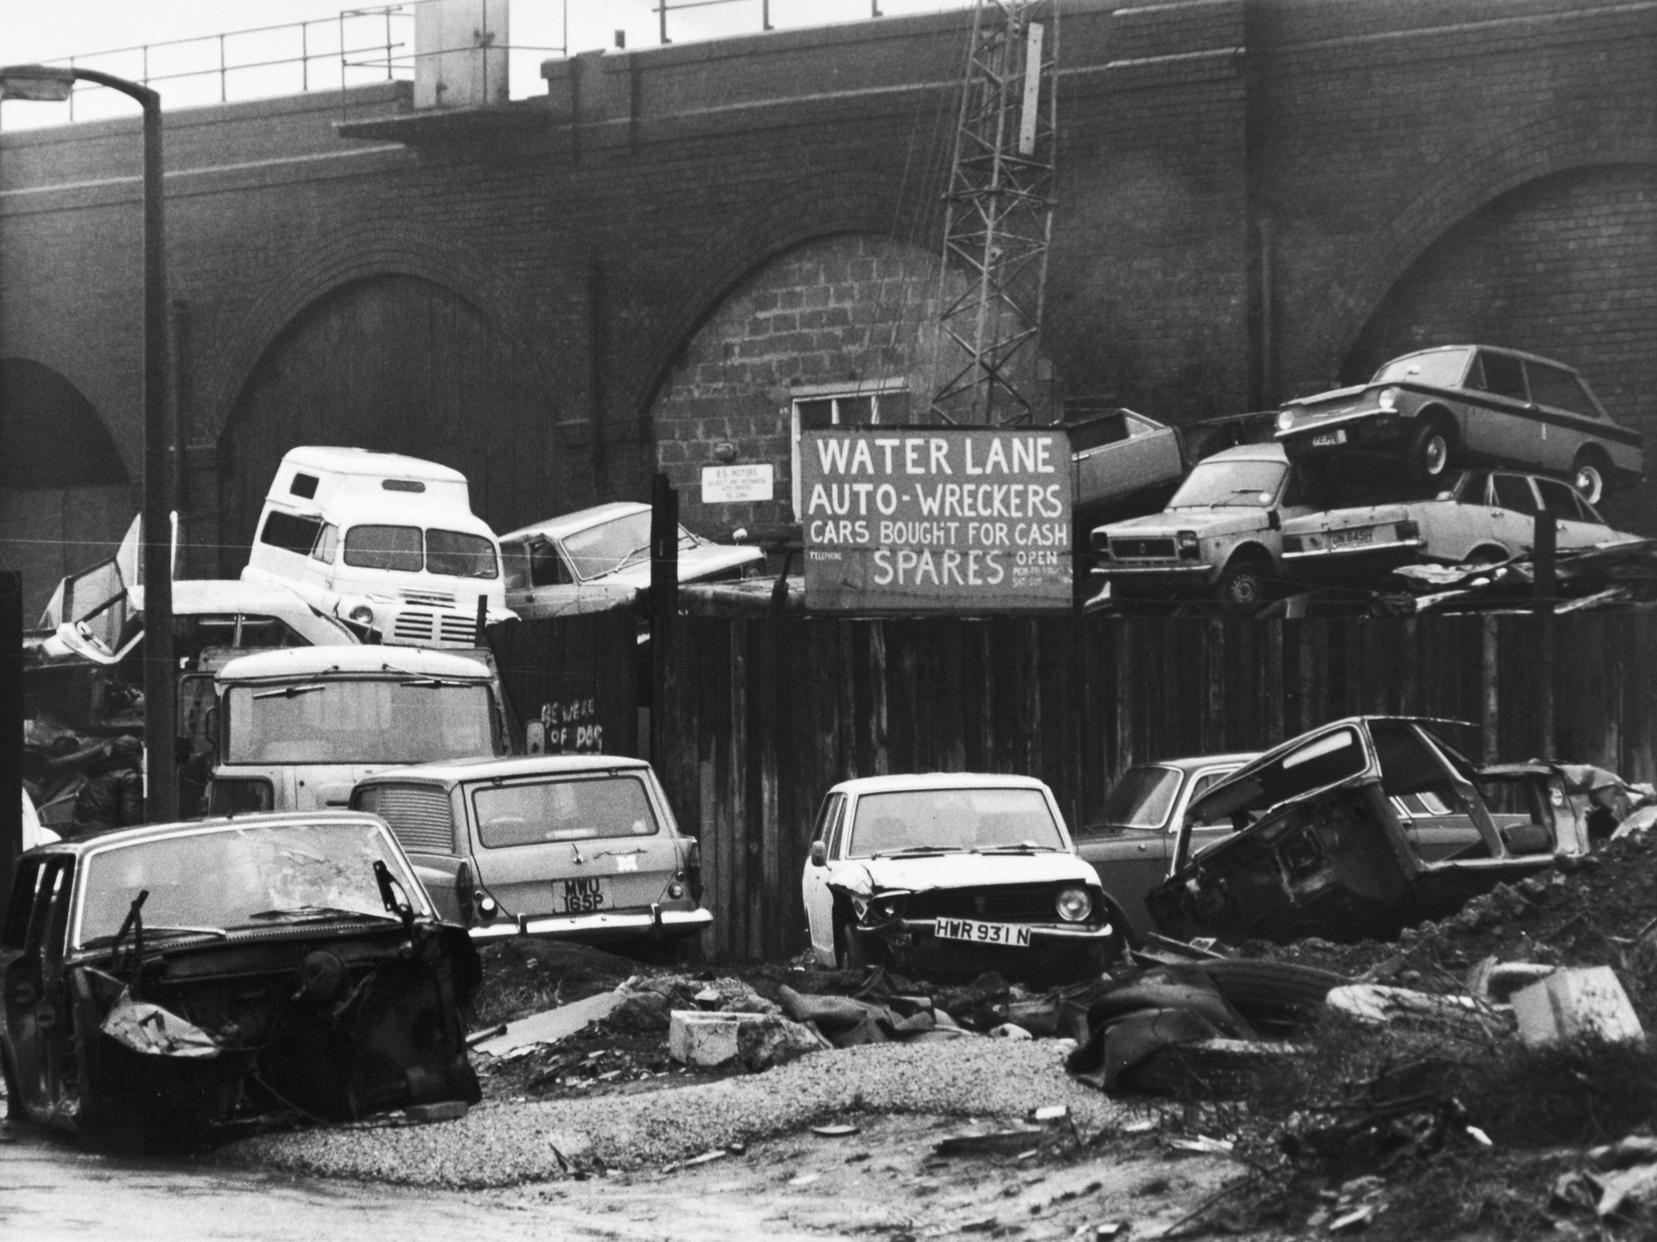 The scrap car yard near the junction of Bath Road and Water Lane at Holbeck.